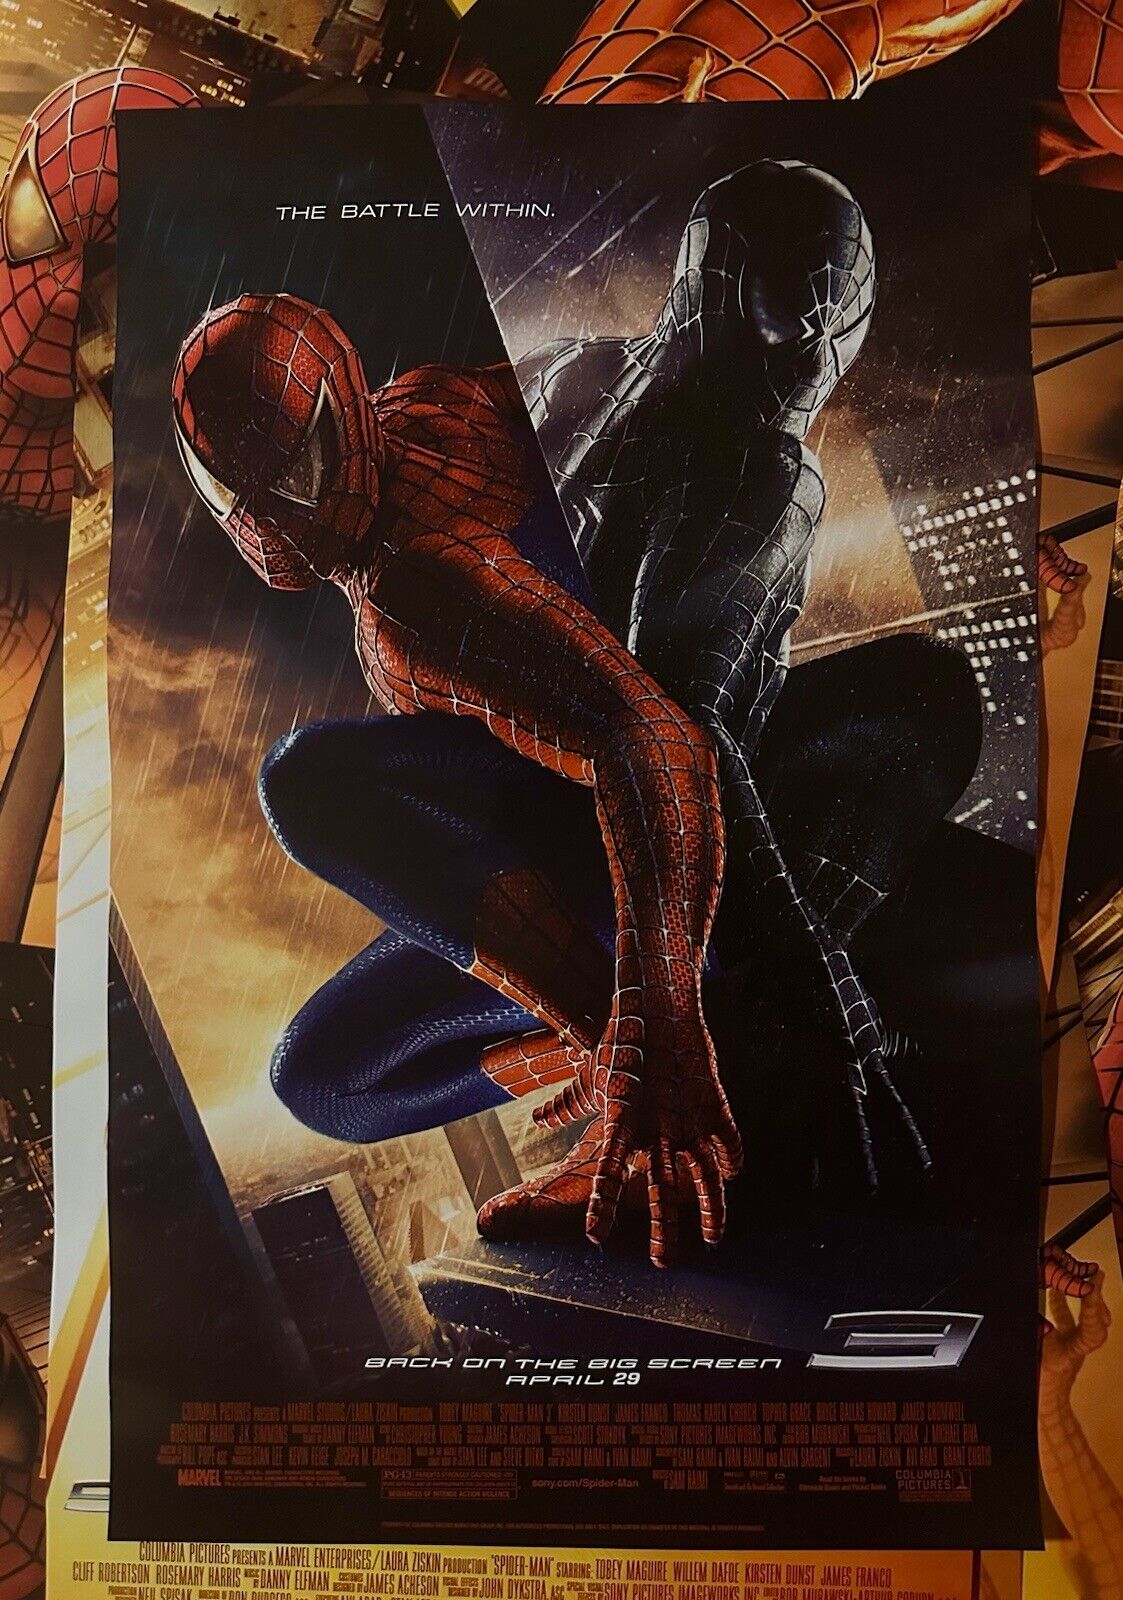 Spider-Man 3 (2007) Movie poster [Re-Release] [Original From AMC Theater]